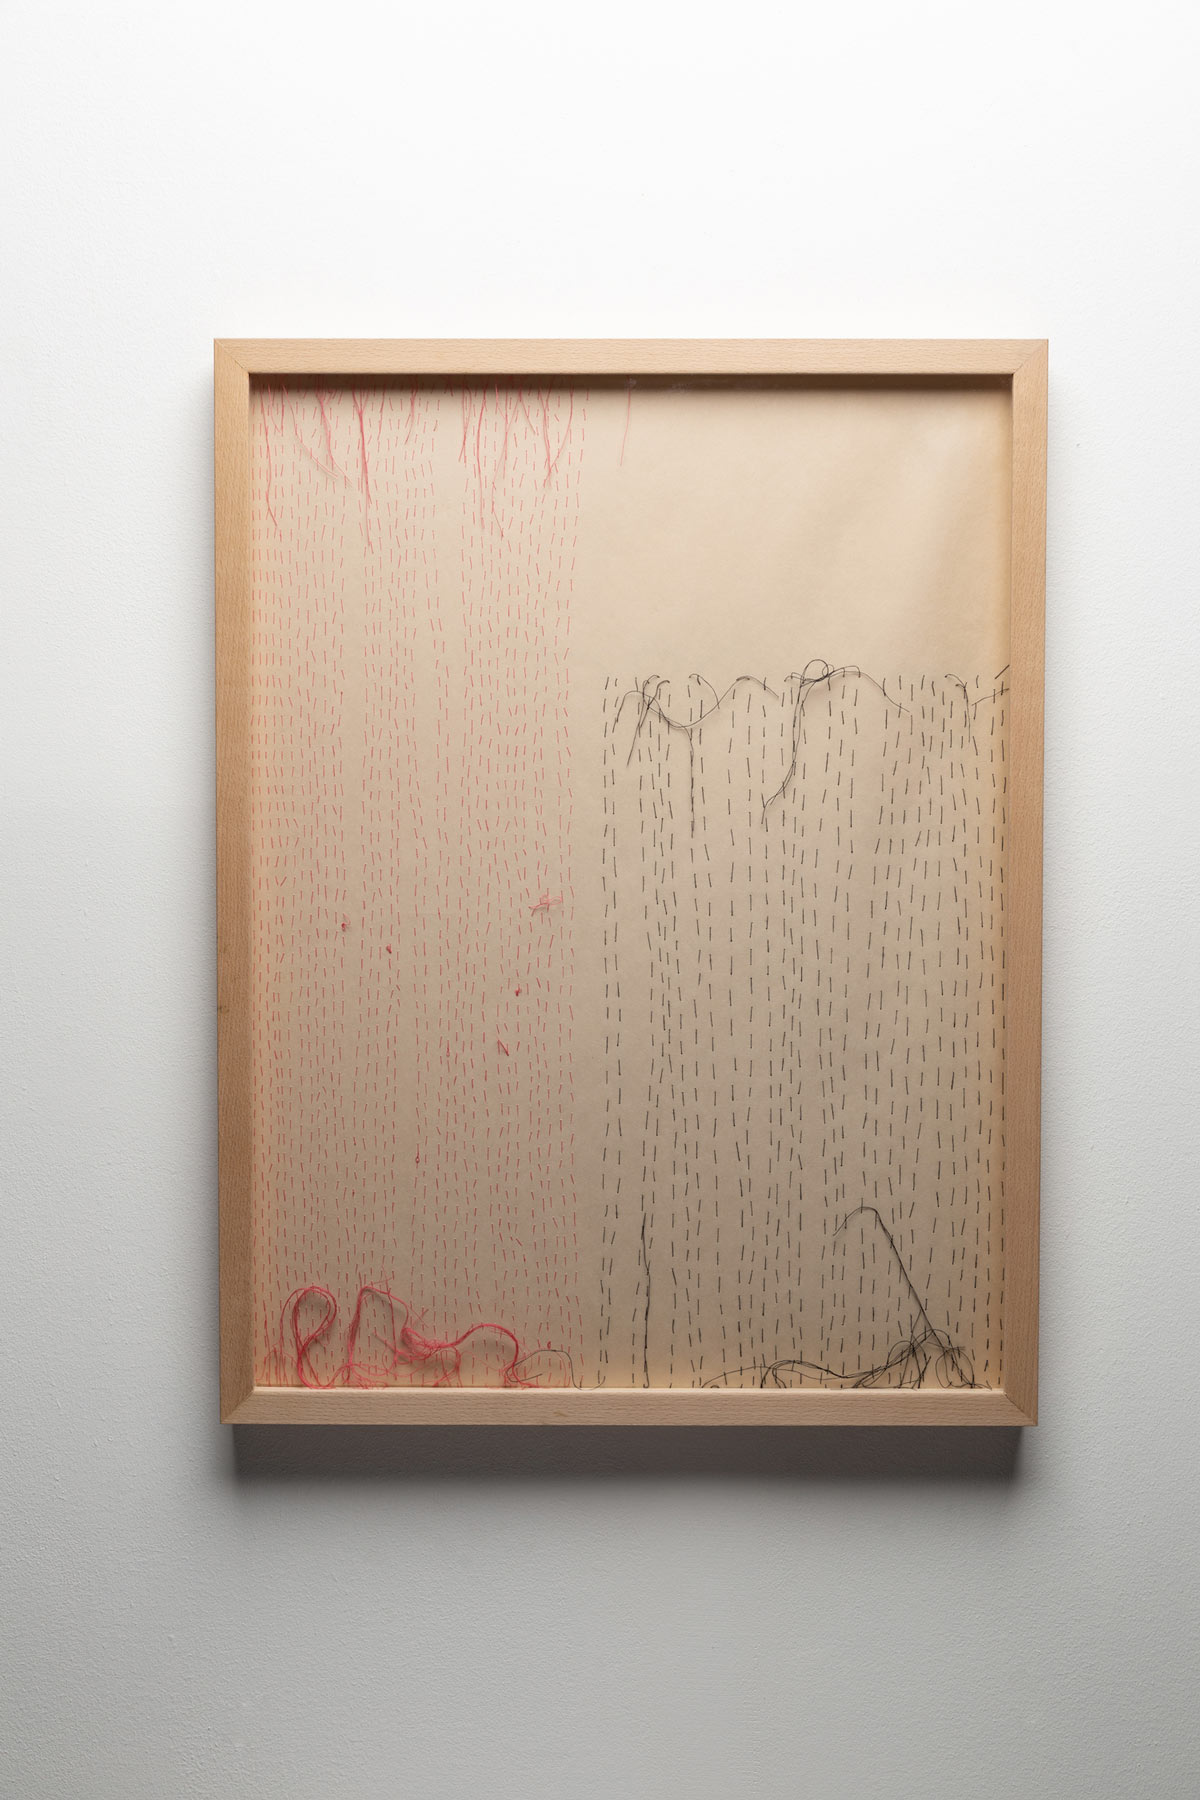 Sara Al Haddad, us, 2018, hand stitches on paper and polyester film paper, set of 4: 63.7x48.5cm (each)